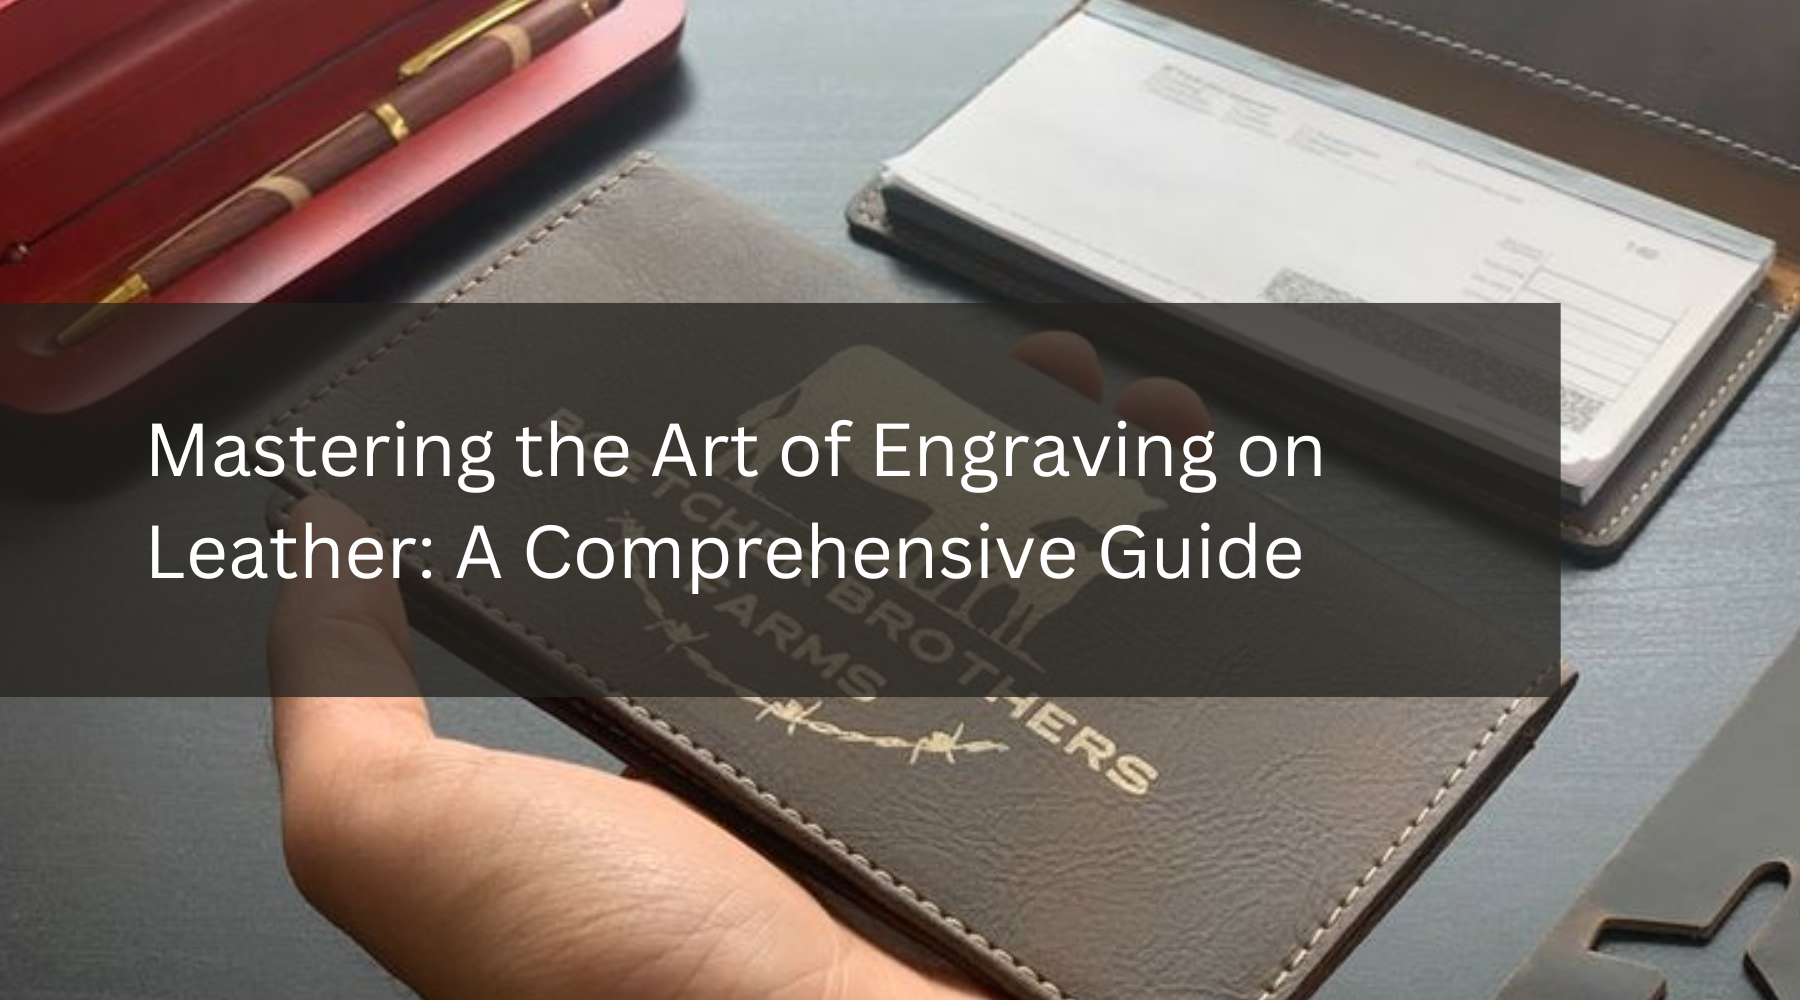 Mastering the Art of Engraving on Leather: A Comprehensive Guide